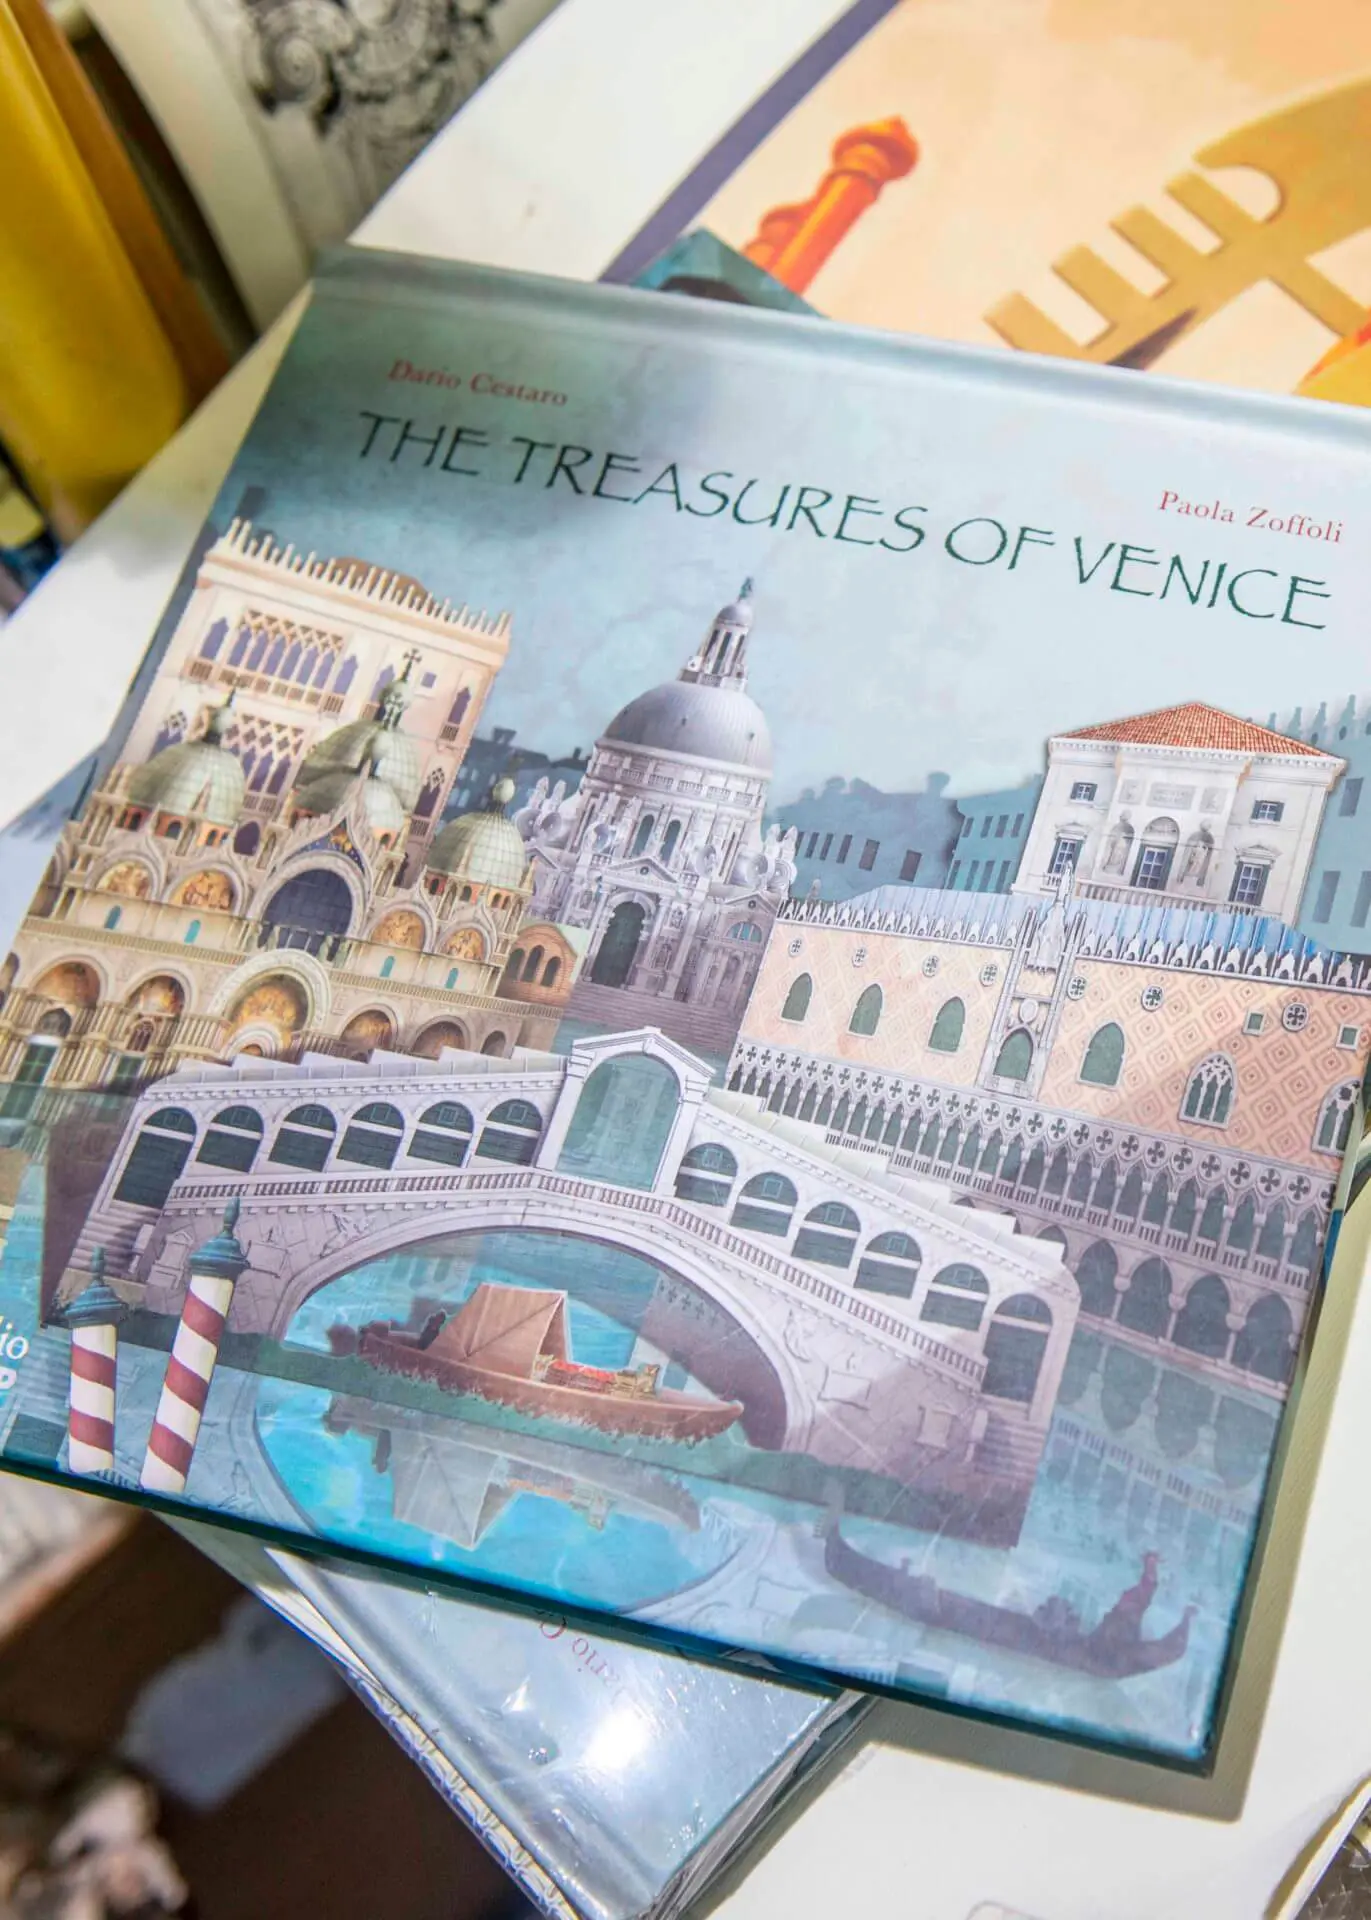 Books and Prints on a Shelf at a Famous Tourist Bookshop in Venice 